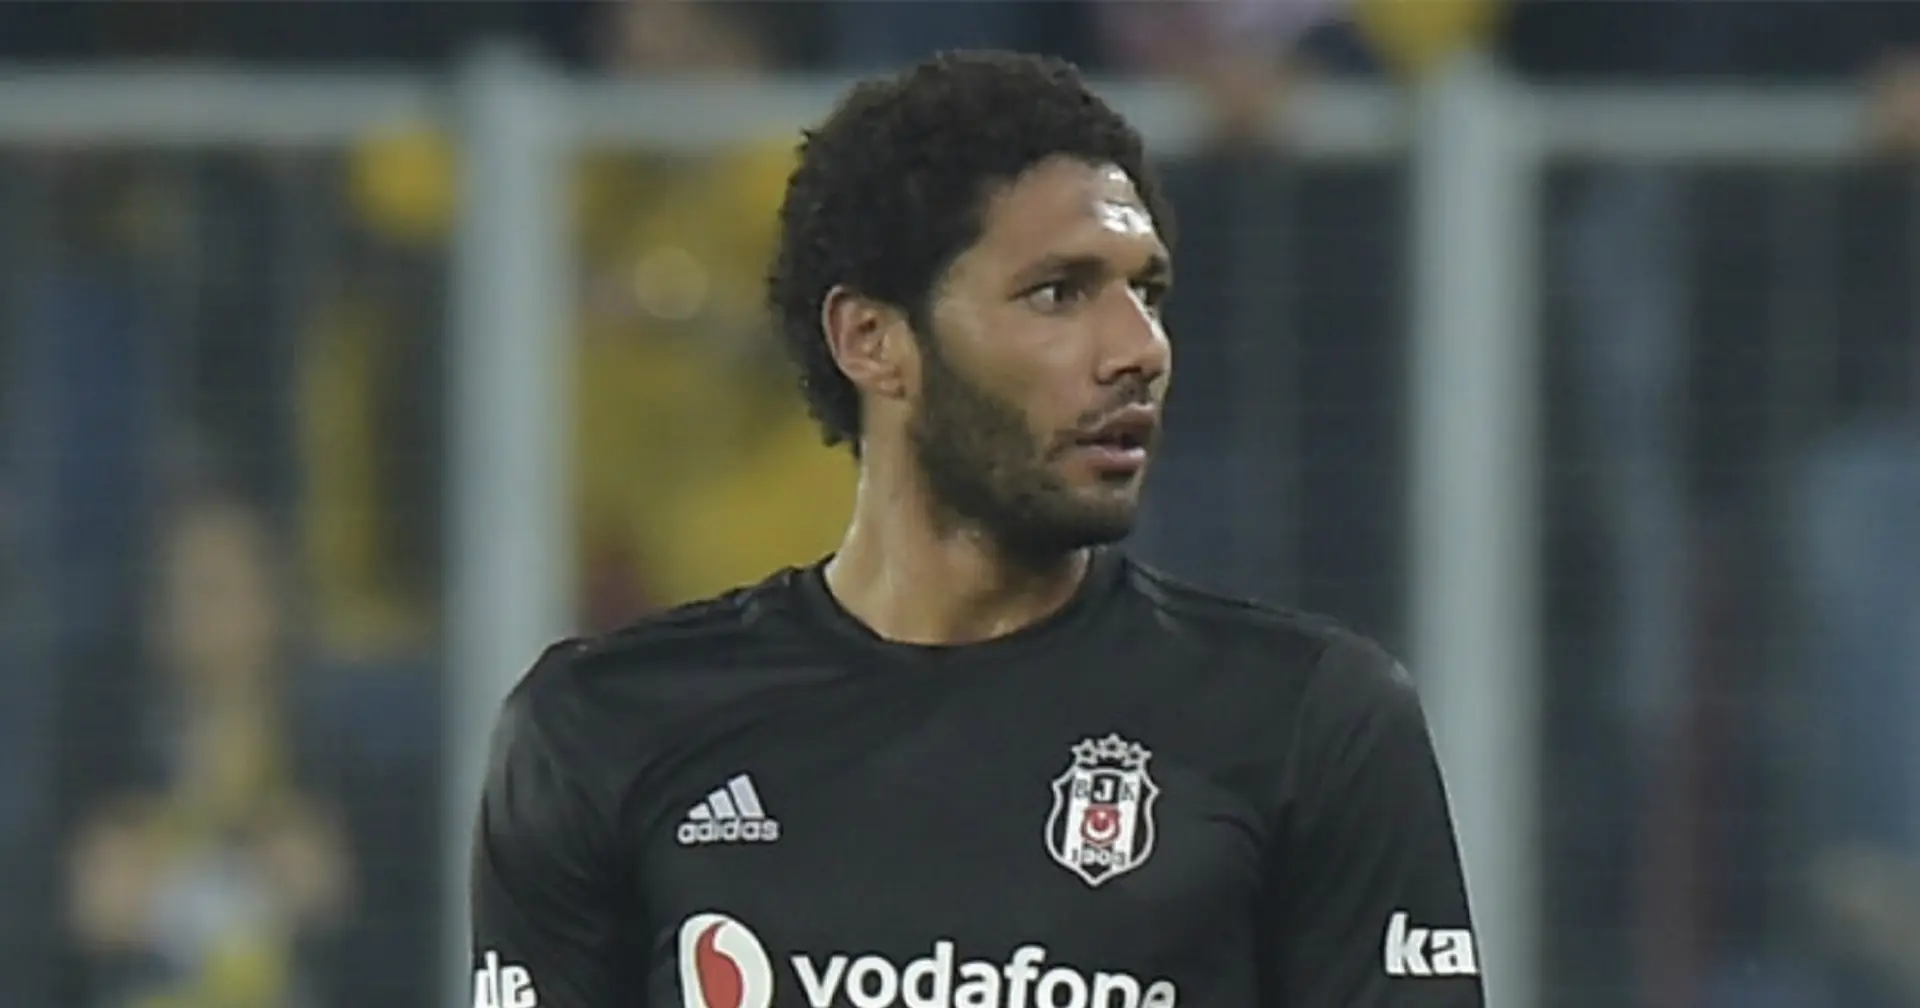 Galatasaray said to enter competition for Mo Elneny, 2 more Turkish sides also in race for Egyptian